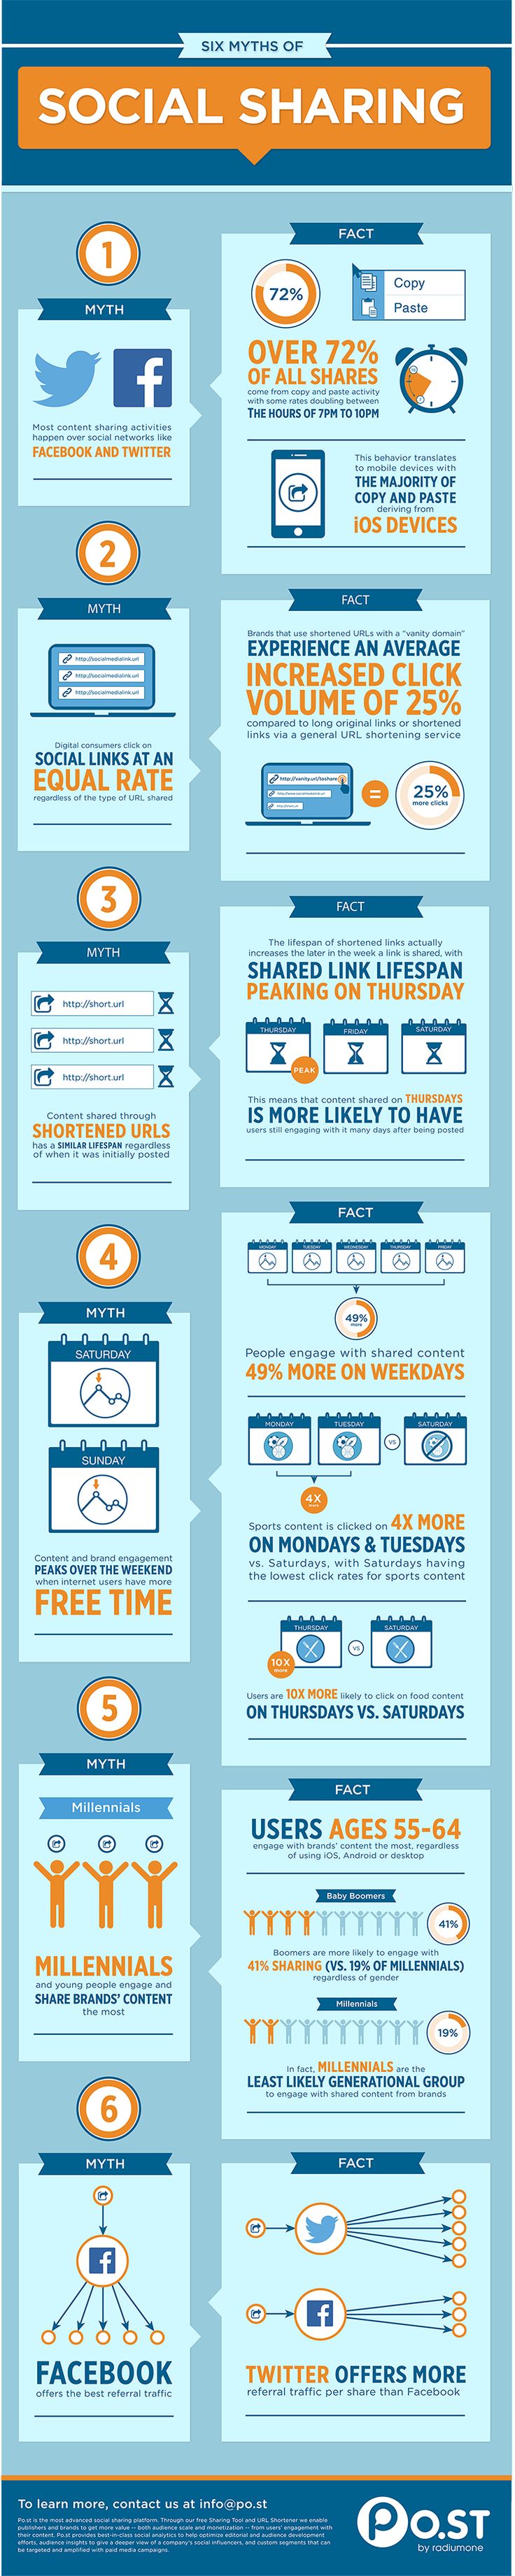 Infographie 129 - 6 myths about social sharing